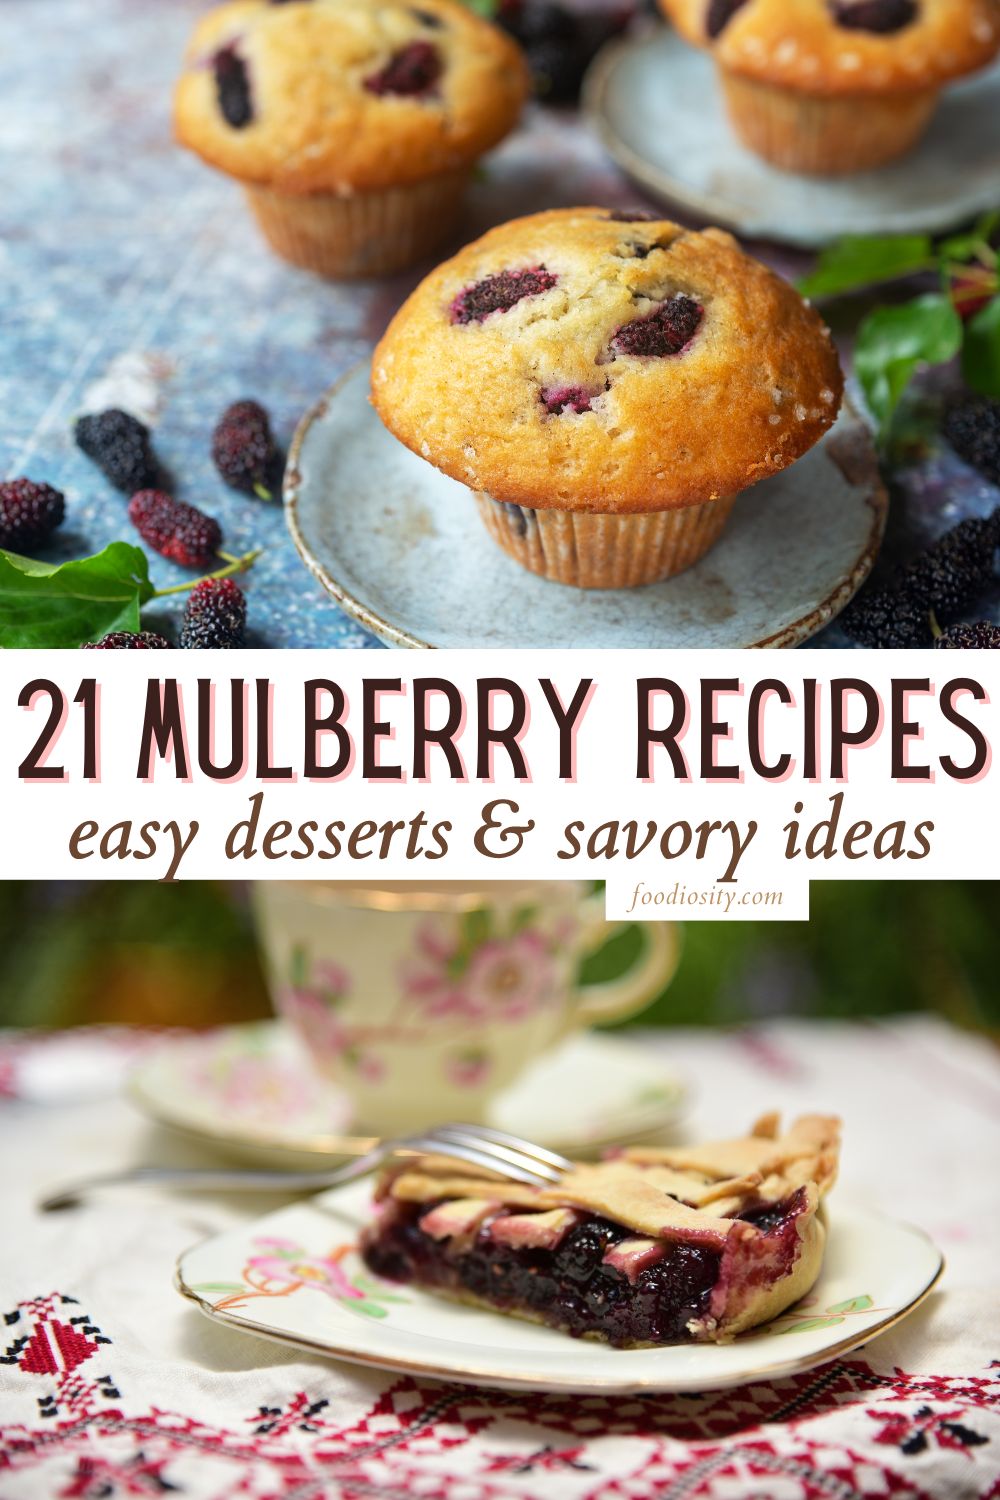 21 Mulberry Recipes 1